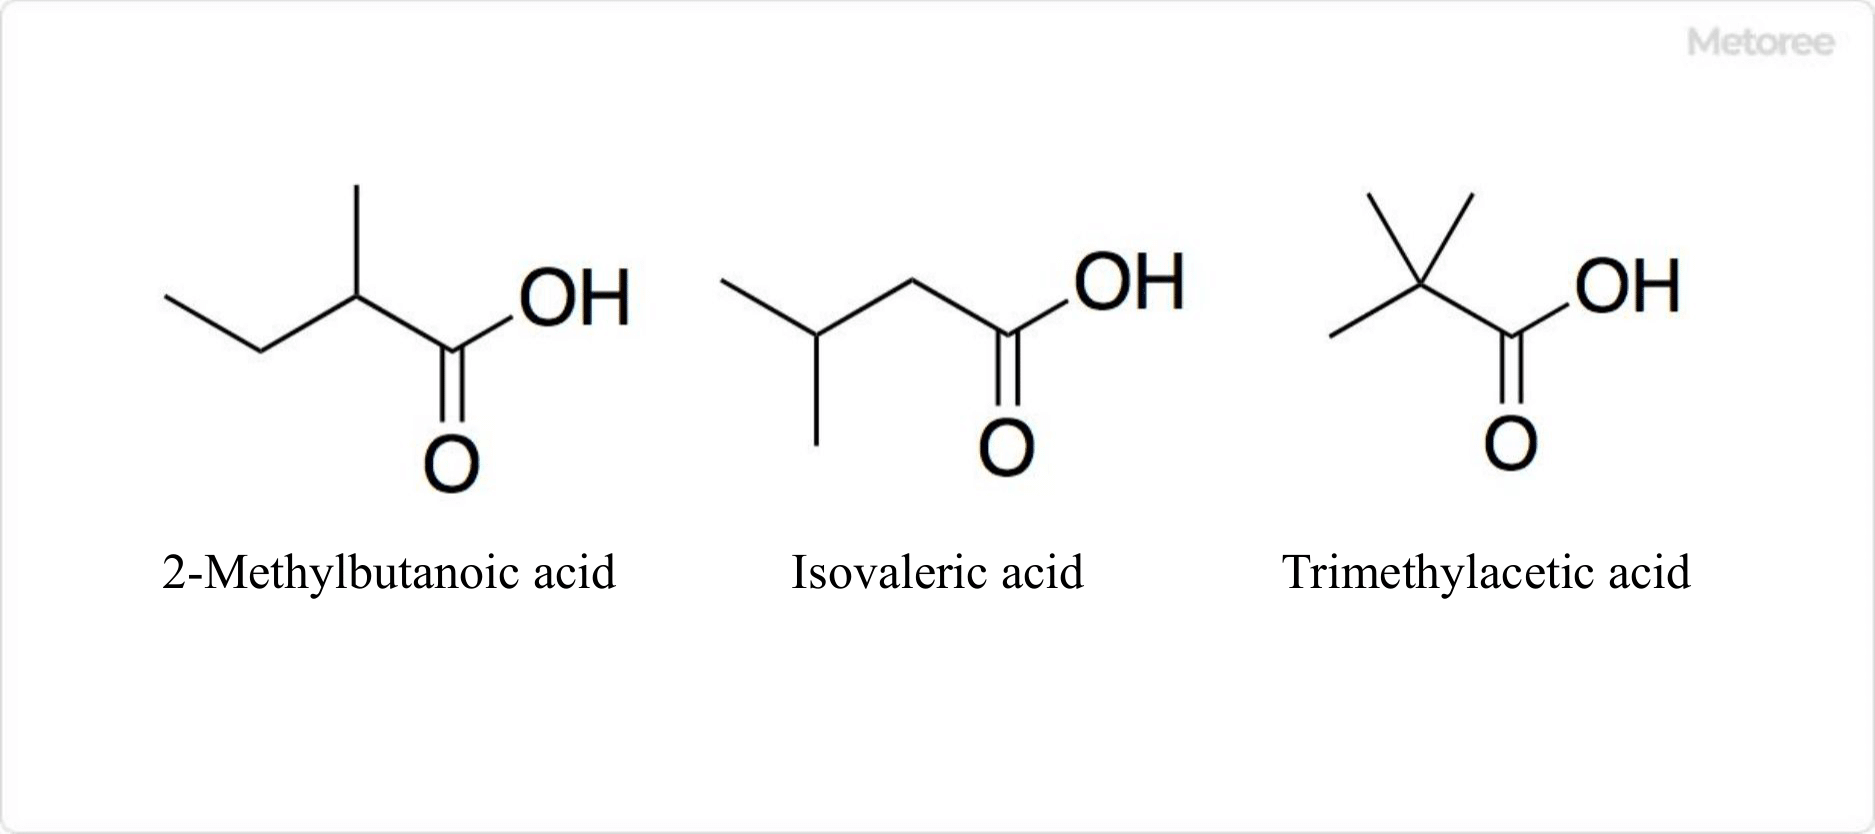 Figure 3. Structural isomers of valeric acid